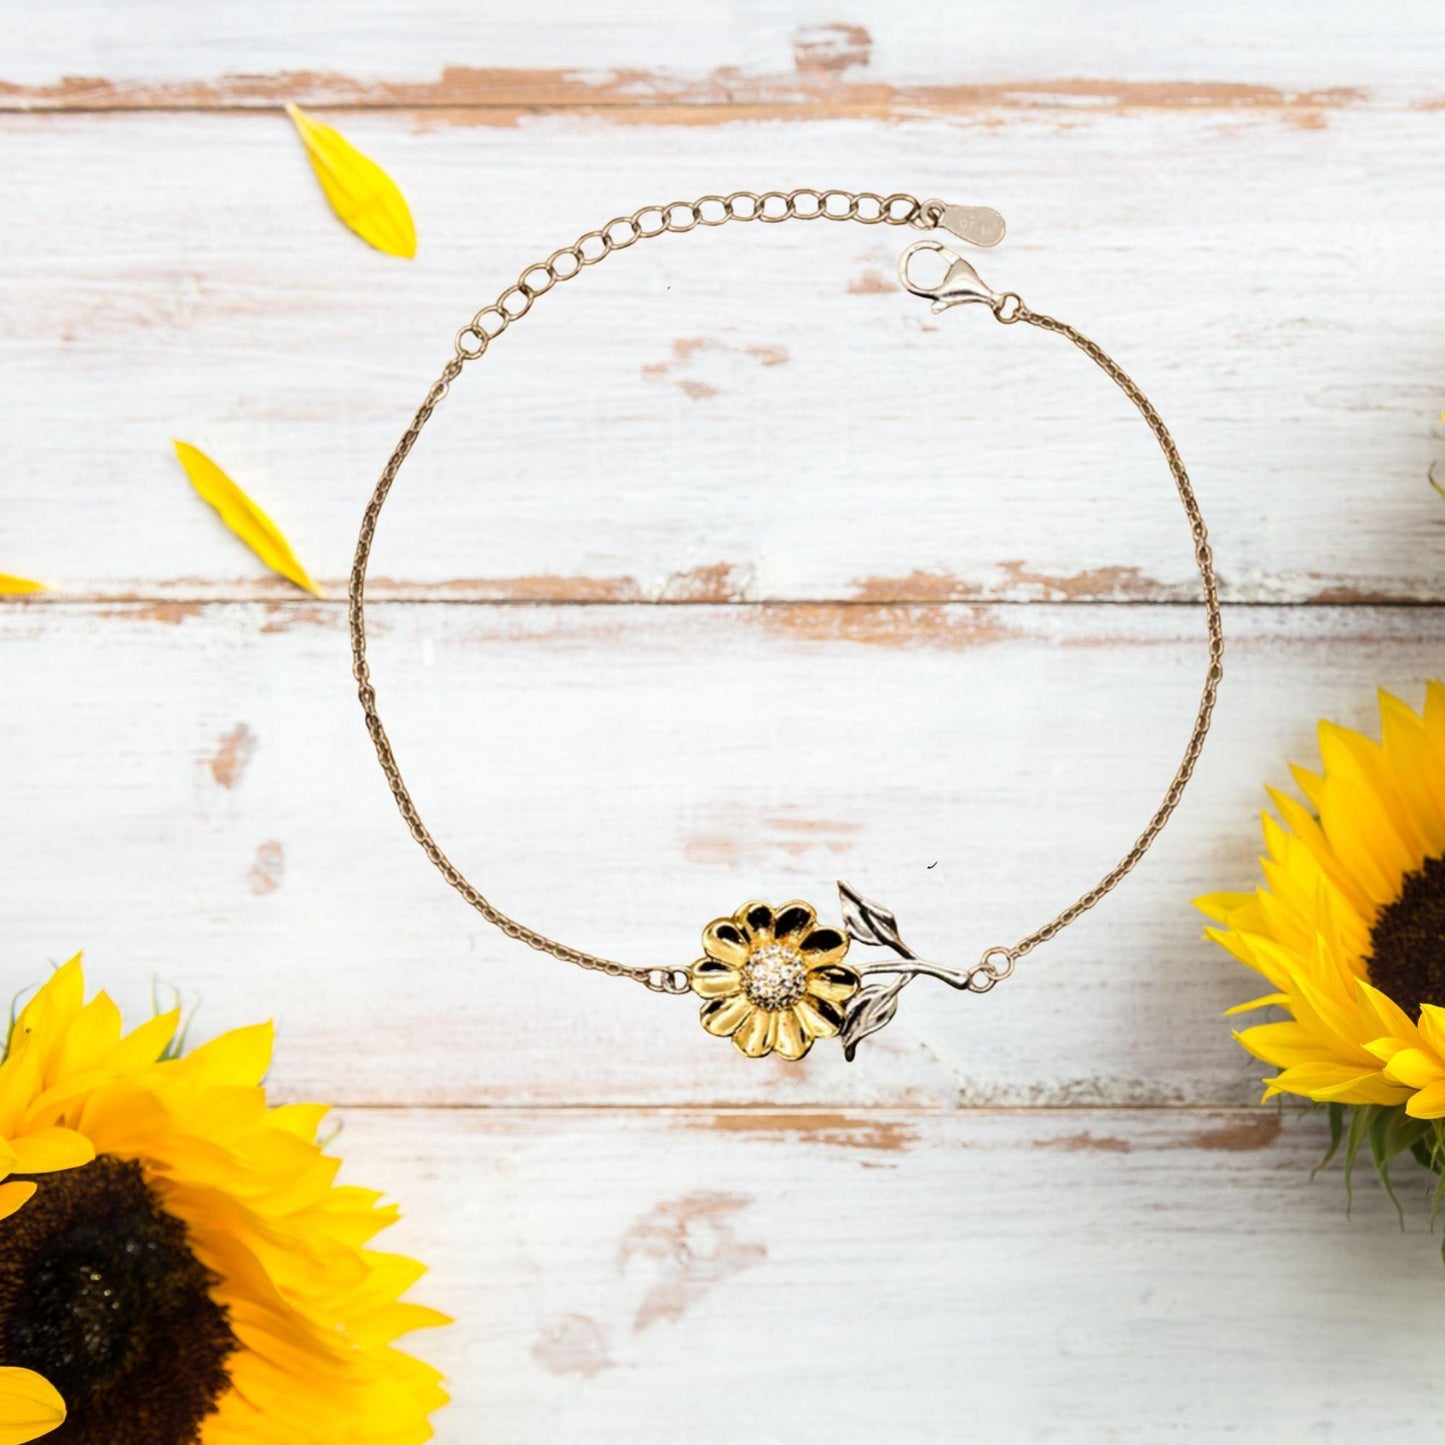 Remarkable Physical Therapist Gifts, Your dedication and hard work, Inspirational Birthday Christmas Unique Sunflower Bracelet For Physical Therapist, Coworkers, Men, Women, Friends - Mallard Moon Gift Shop